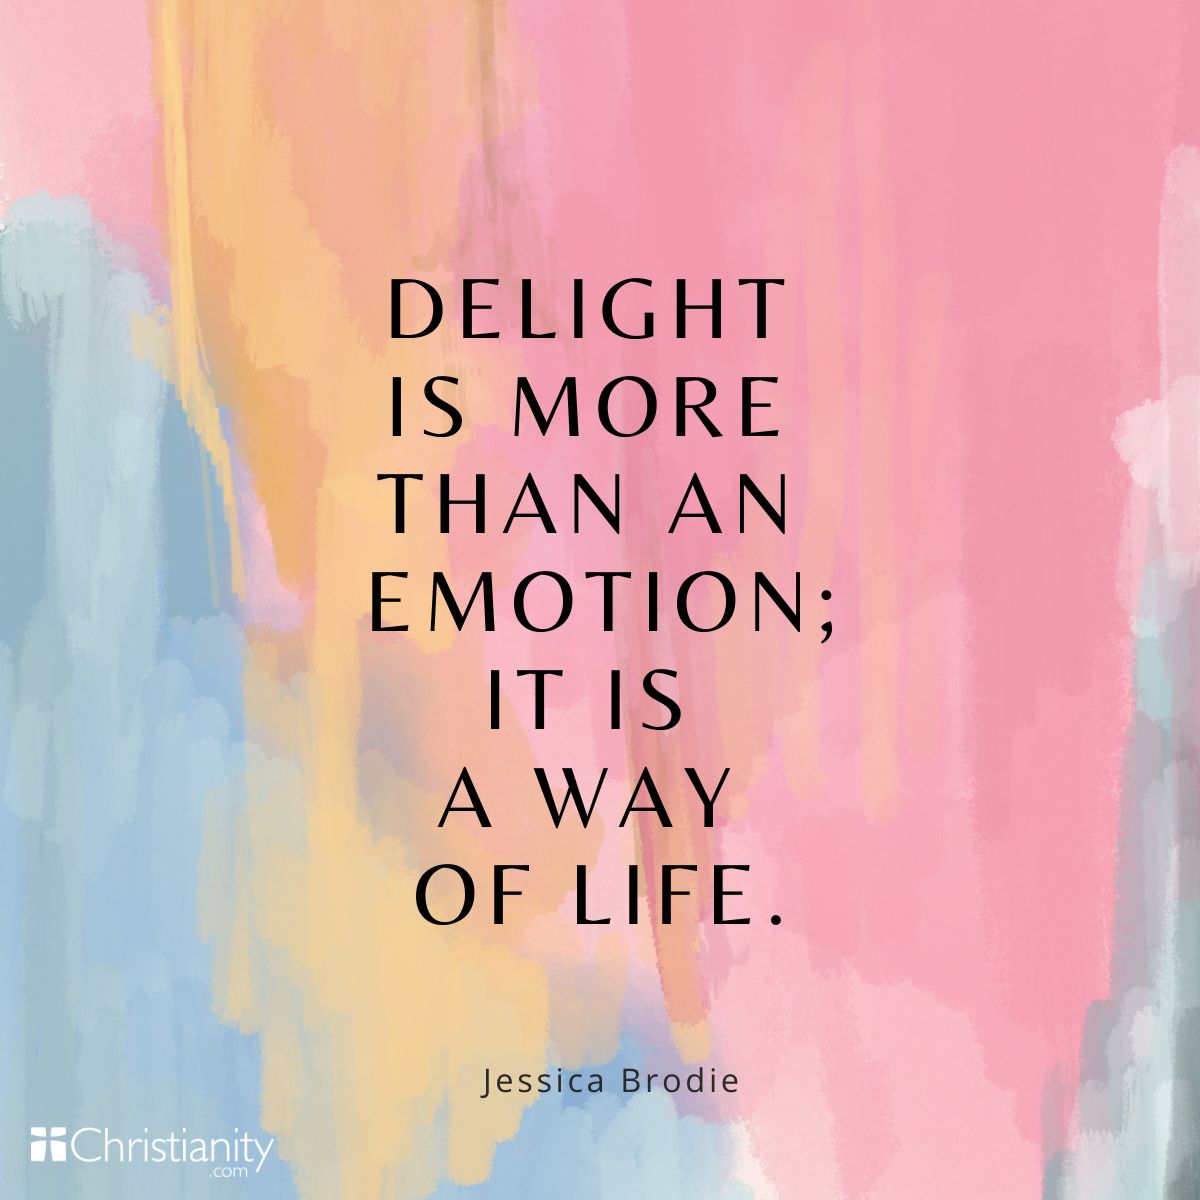 Delight; what does it mean to delight yourself in the Lord?